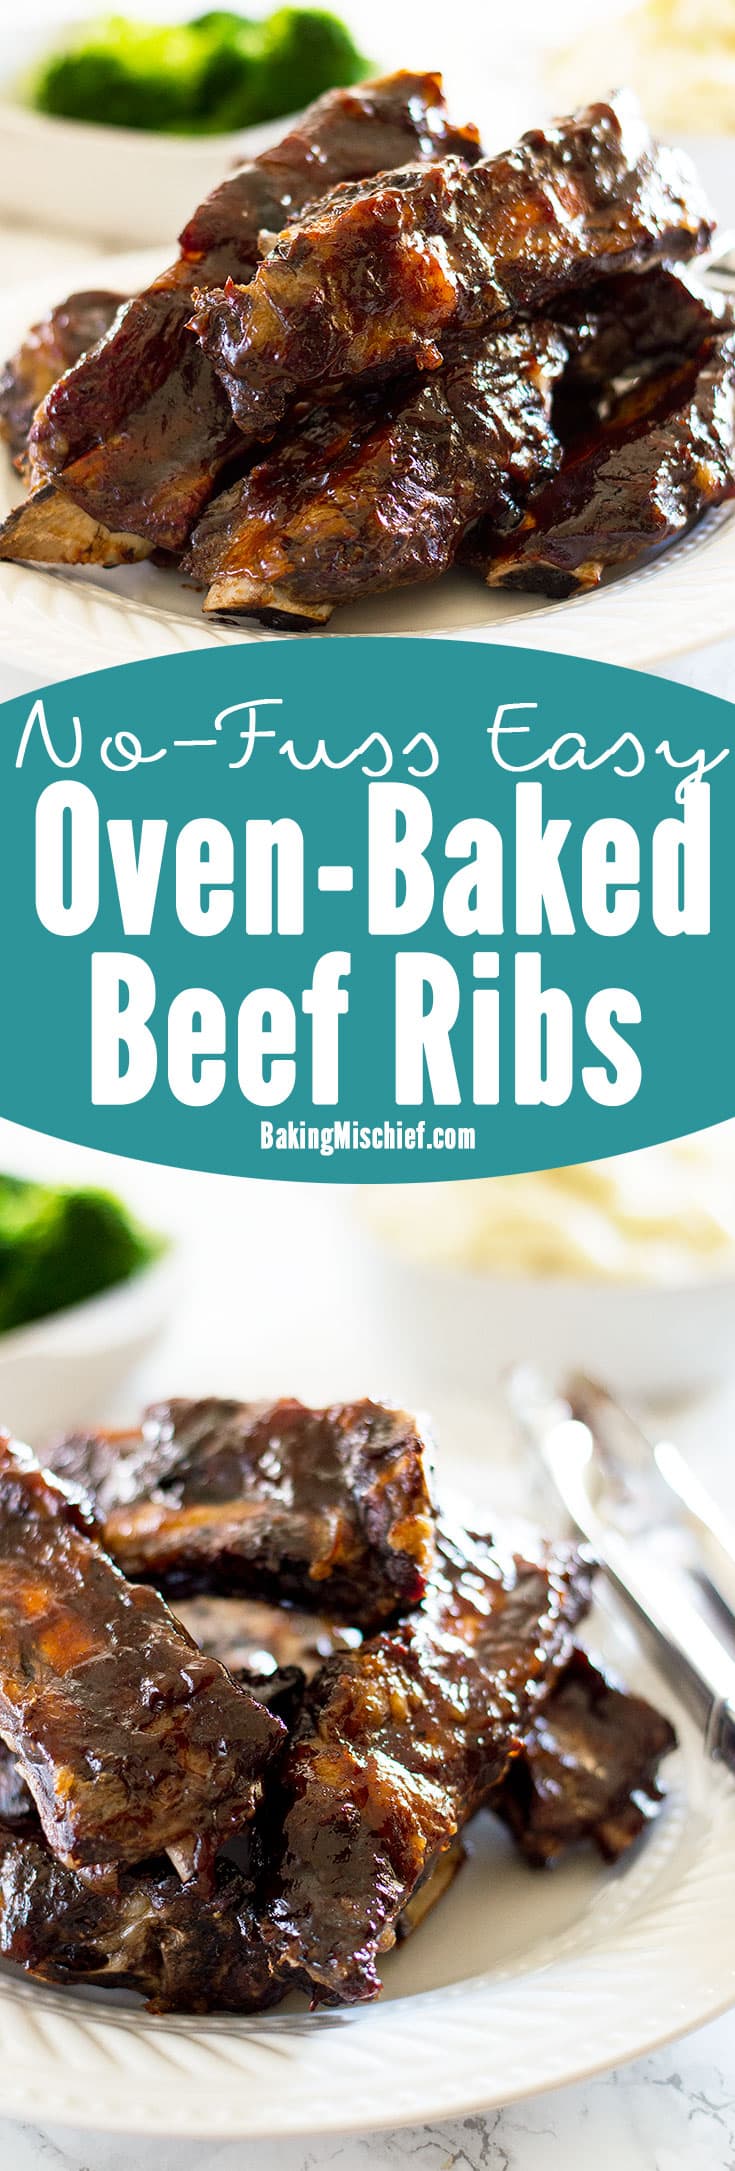 No-Fuss Easy Oven-Baked Beef Ribs